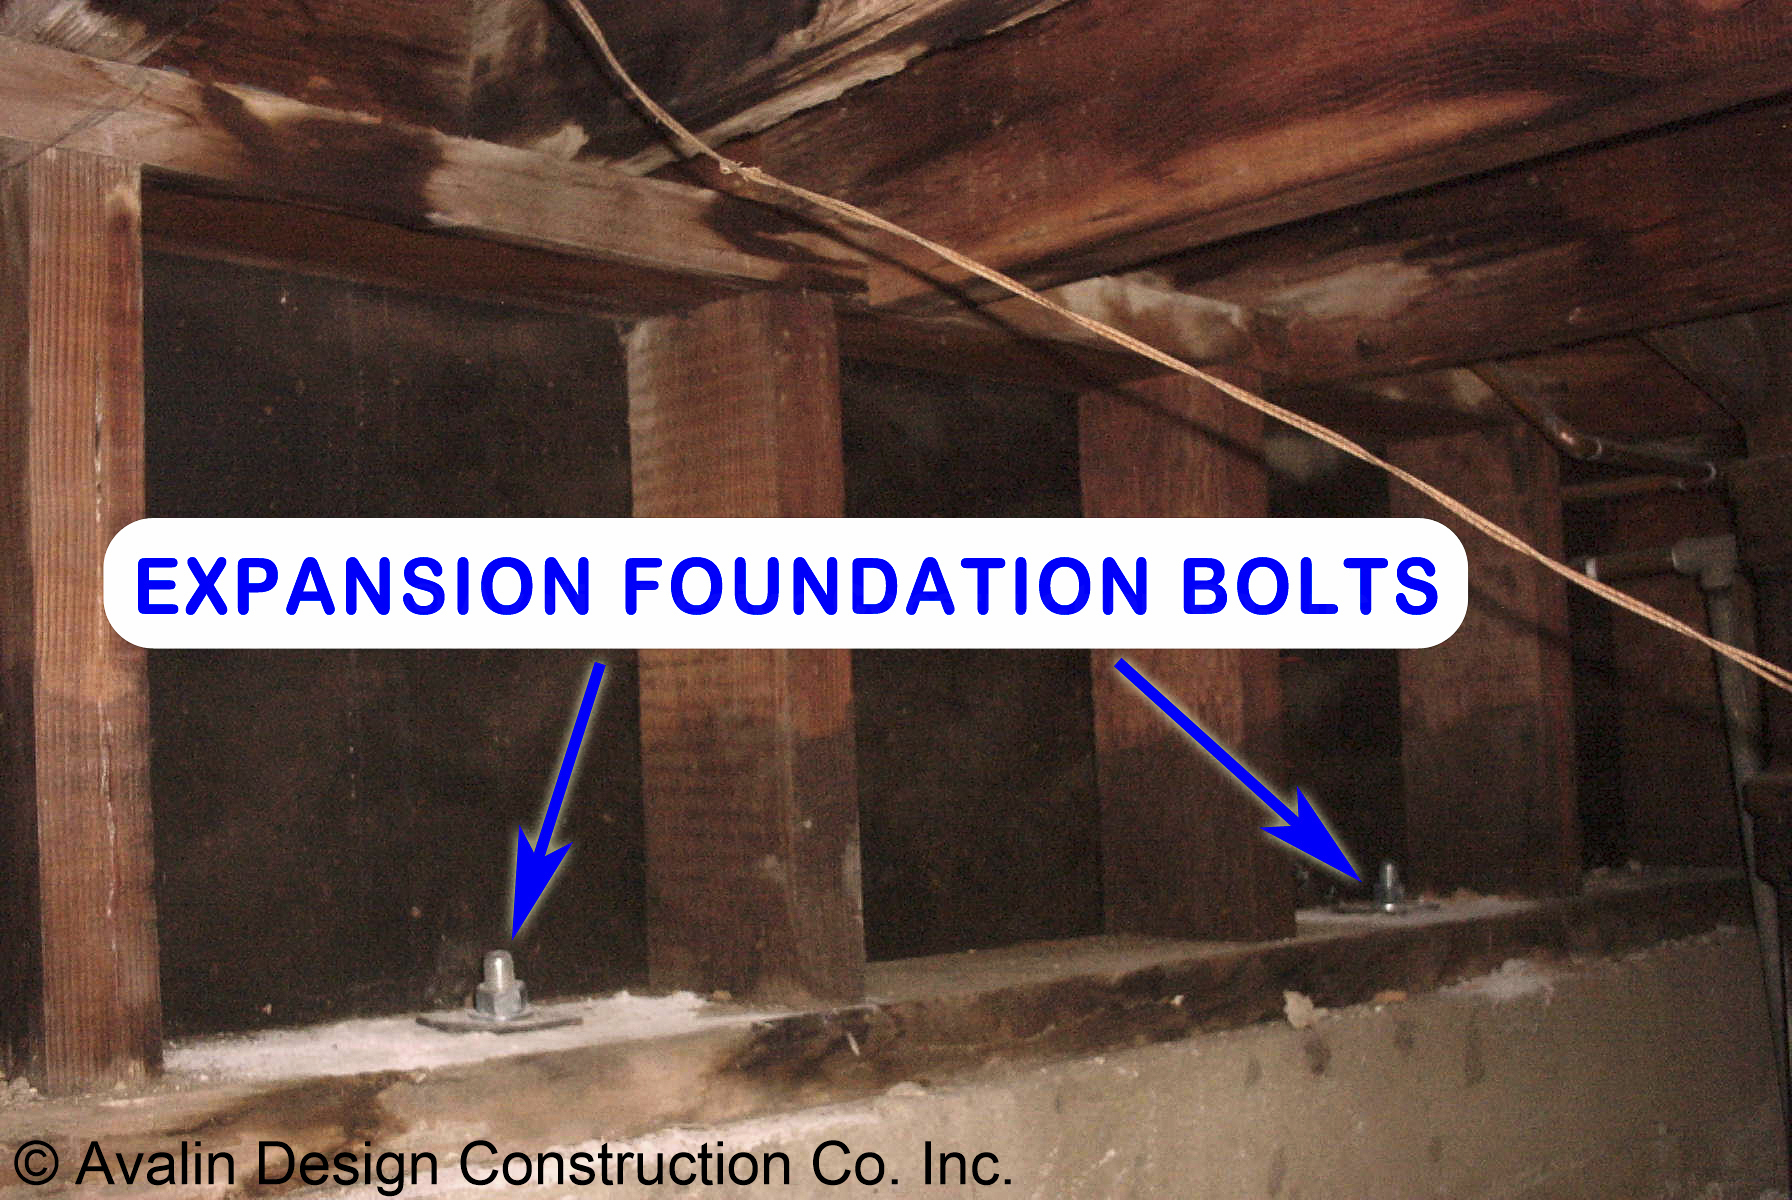 Expansion Foundation Bolts installed